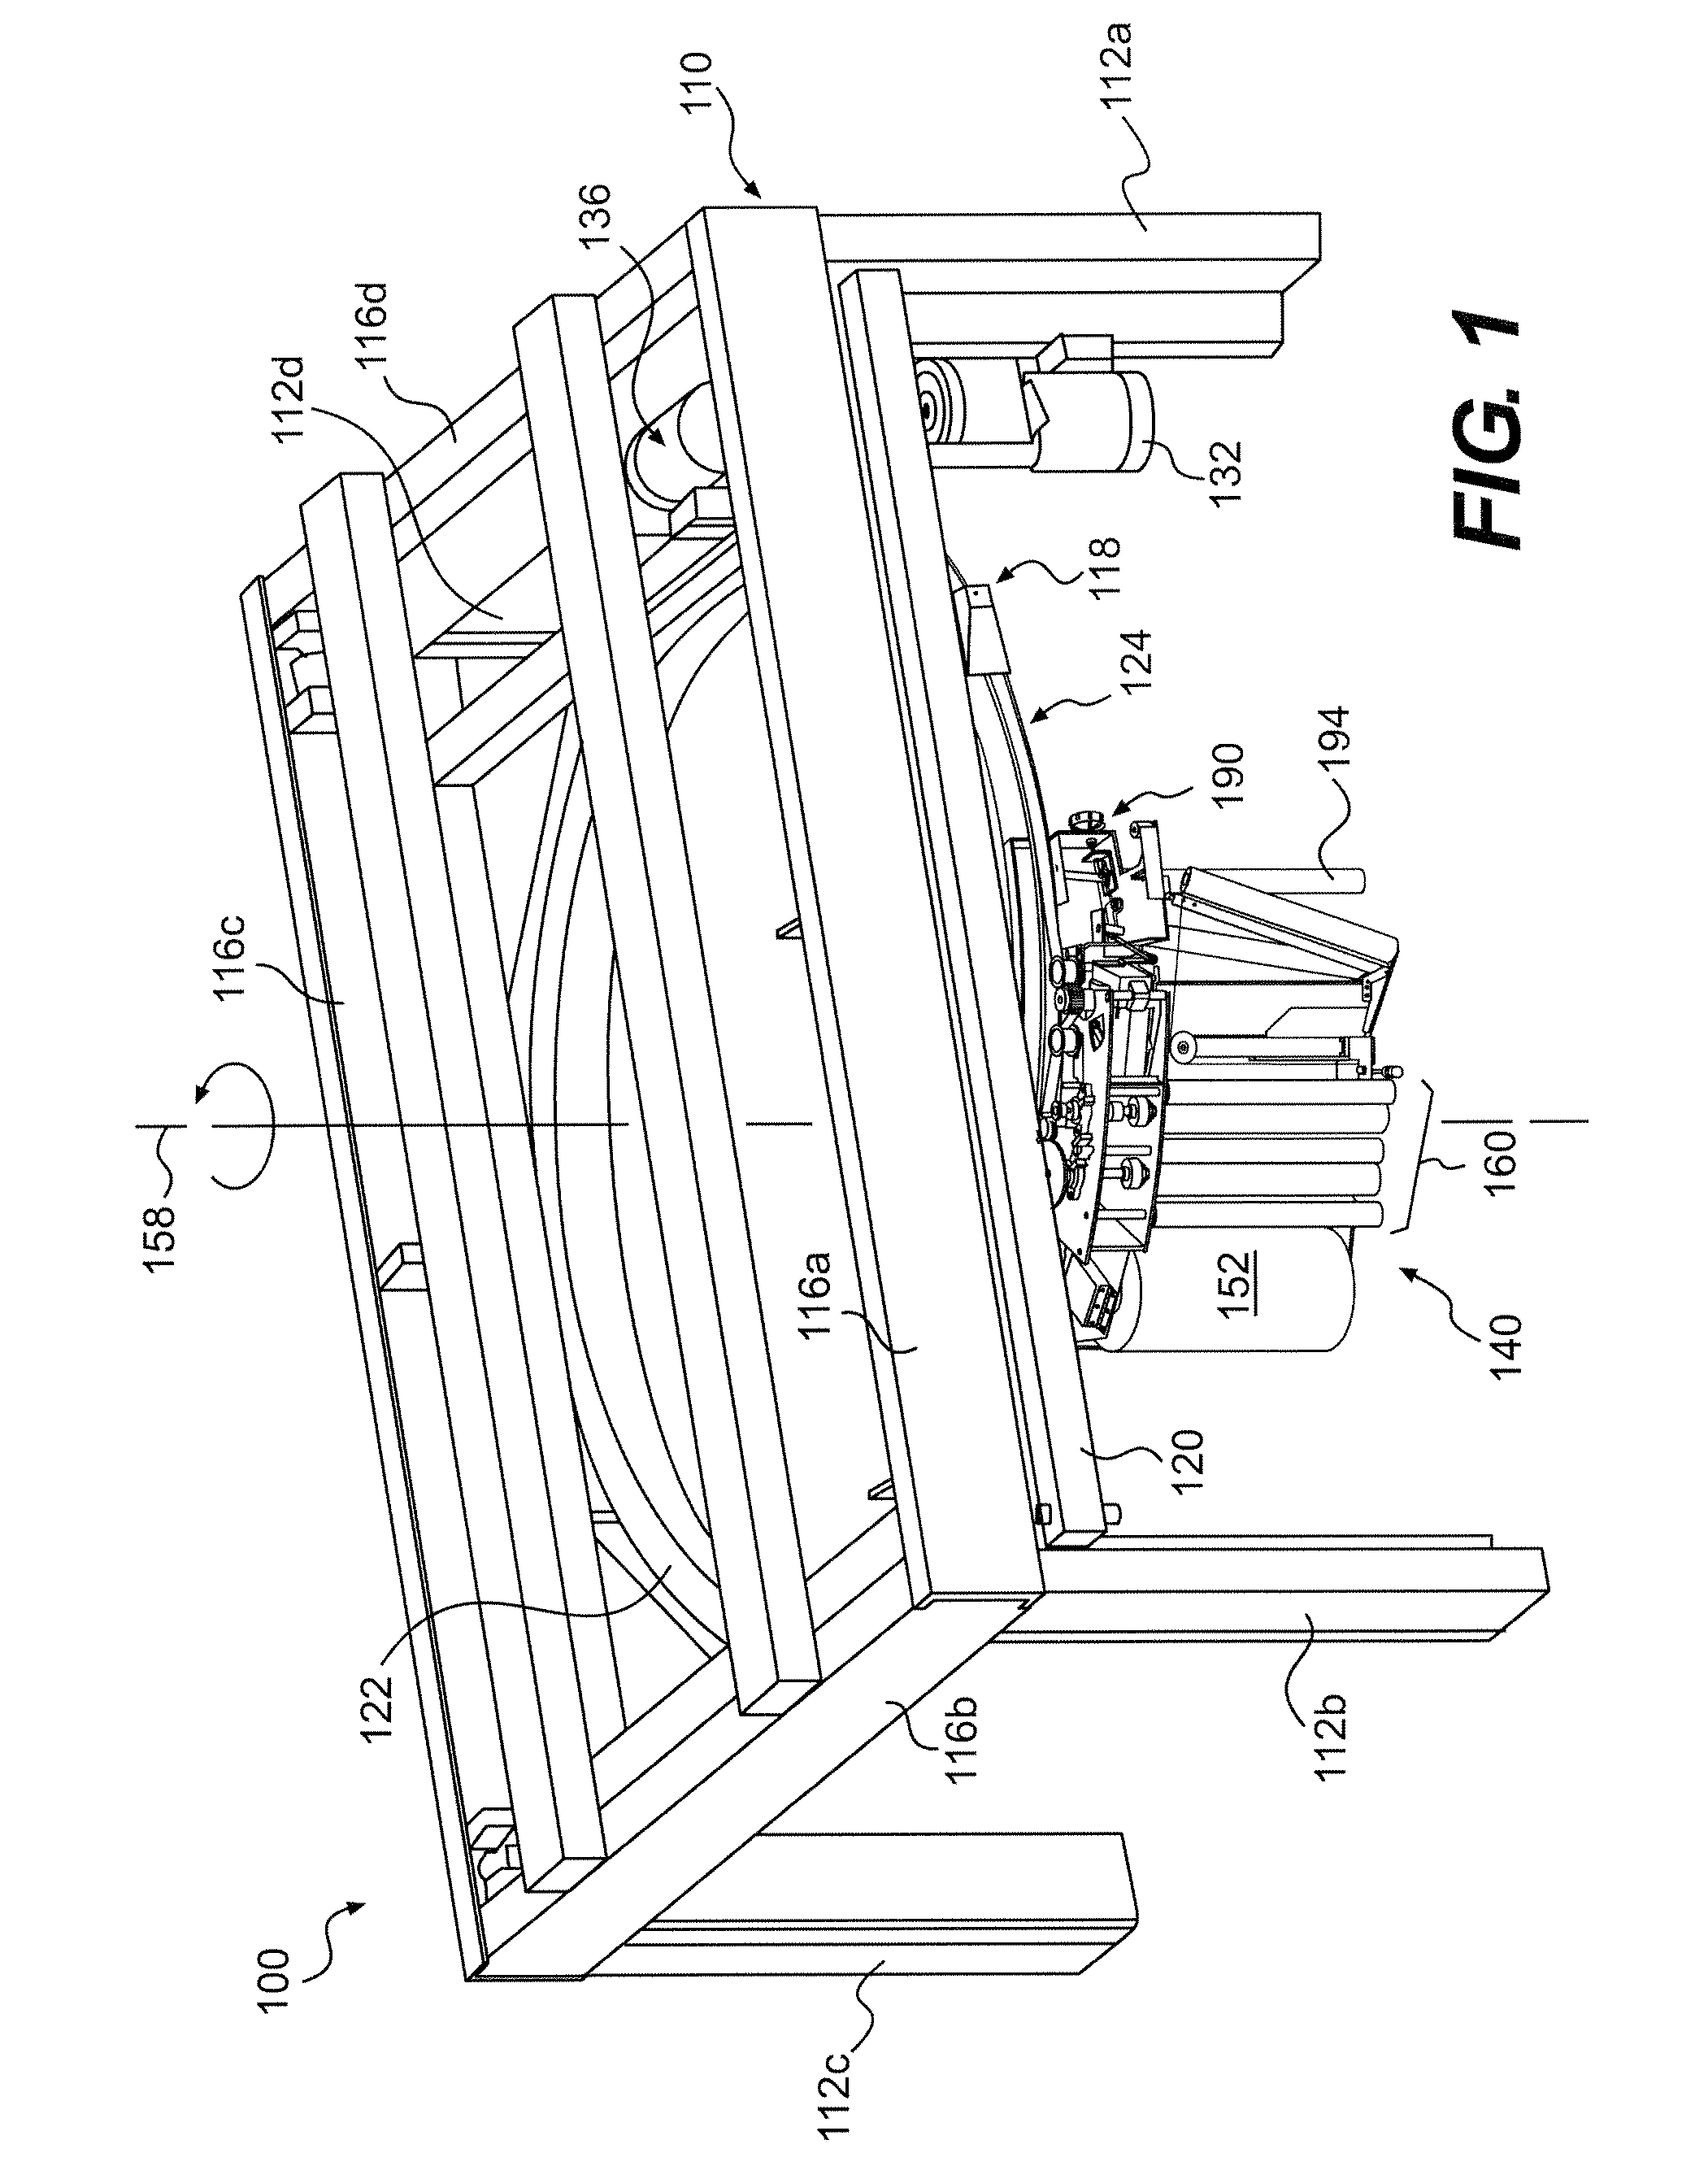 Wrapping apparatus including metered pre-stretch film delivery assembly and method of using